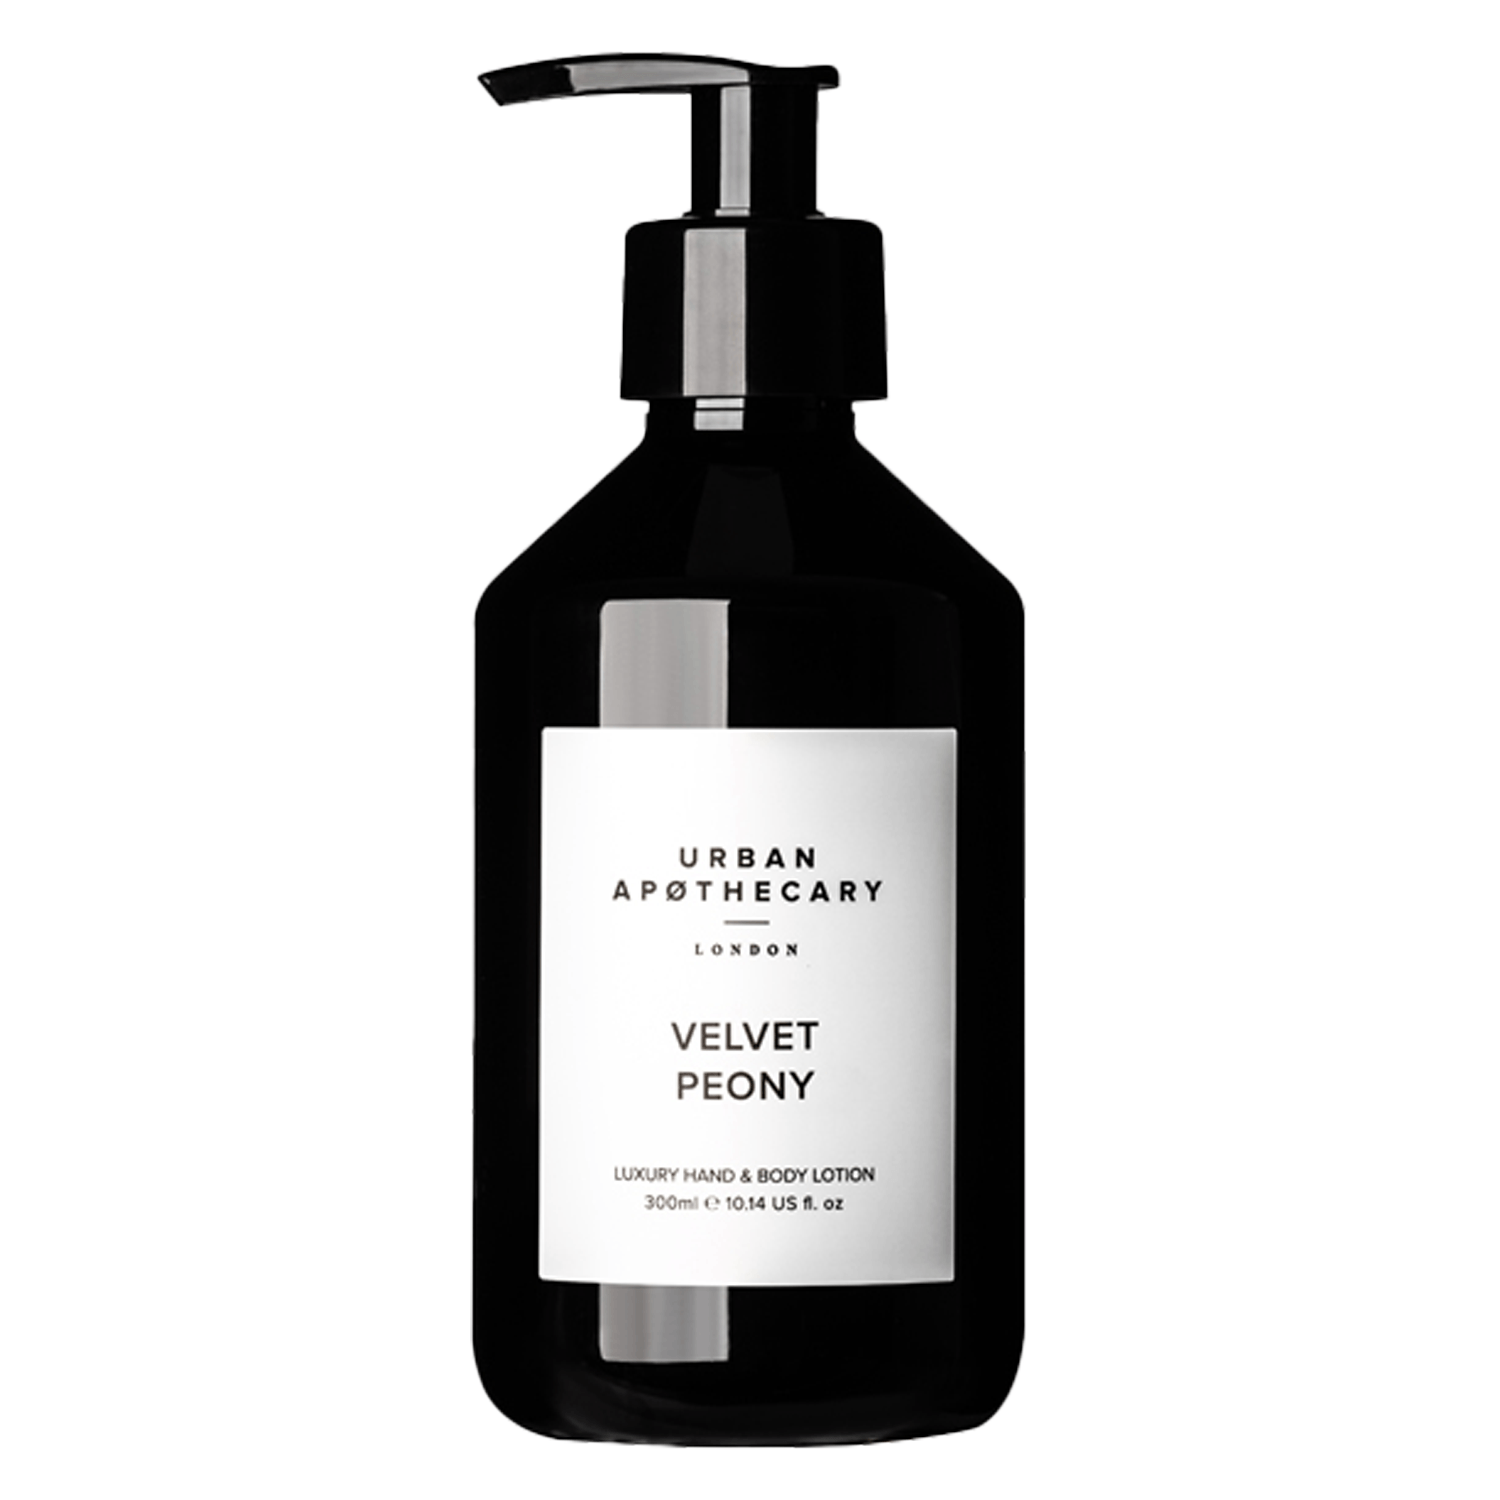 Product image from Urban Apothecary - Luxury Hand & Body Lotion Velvet Peony